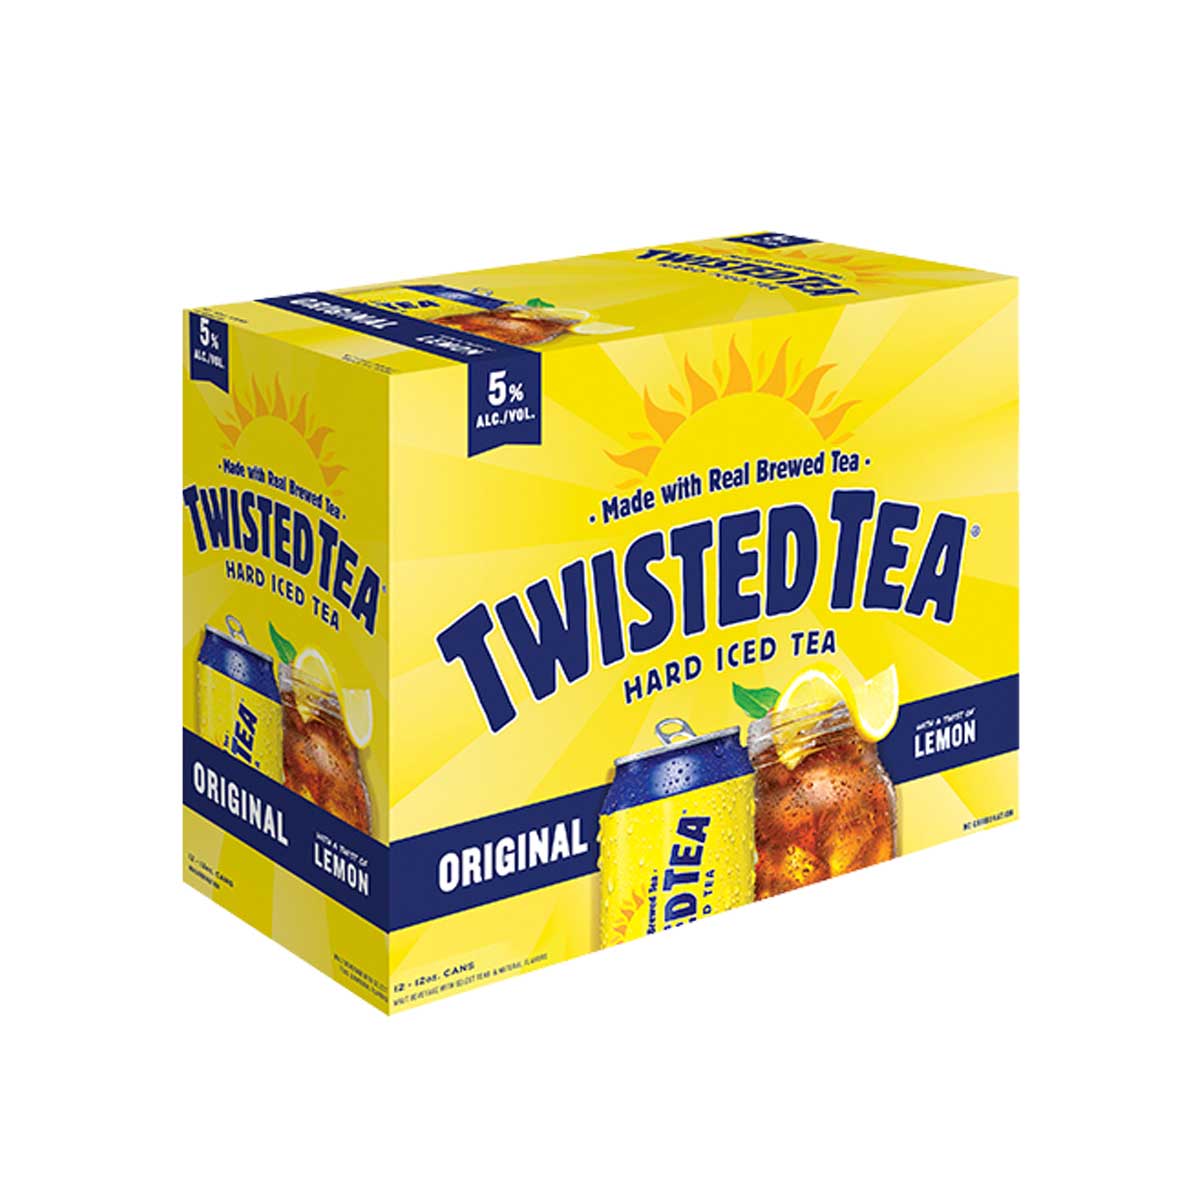 TAG Liquor Stores Delivery - Twisted Tea Original Hard Iced Tea 12 Pack Cans